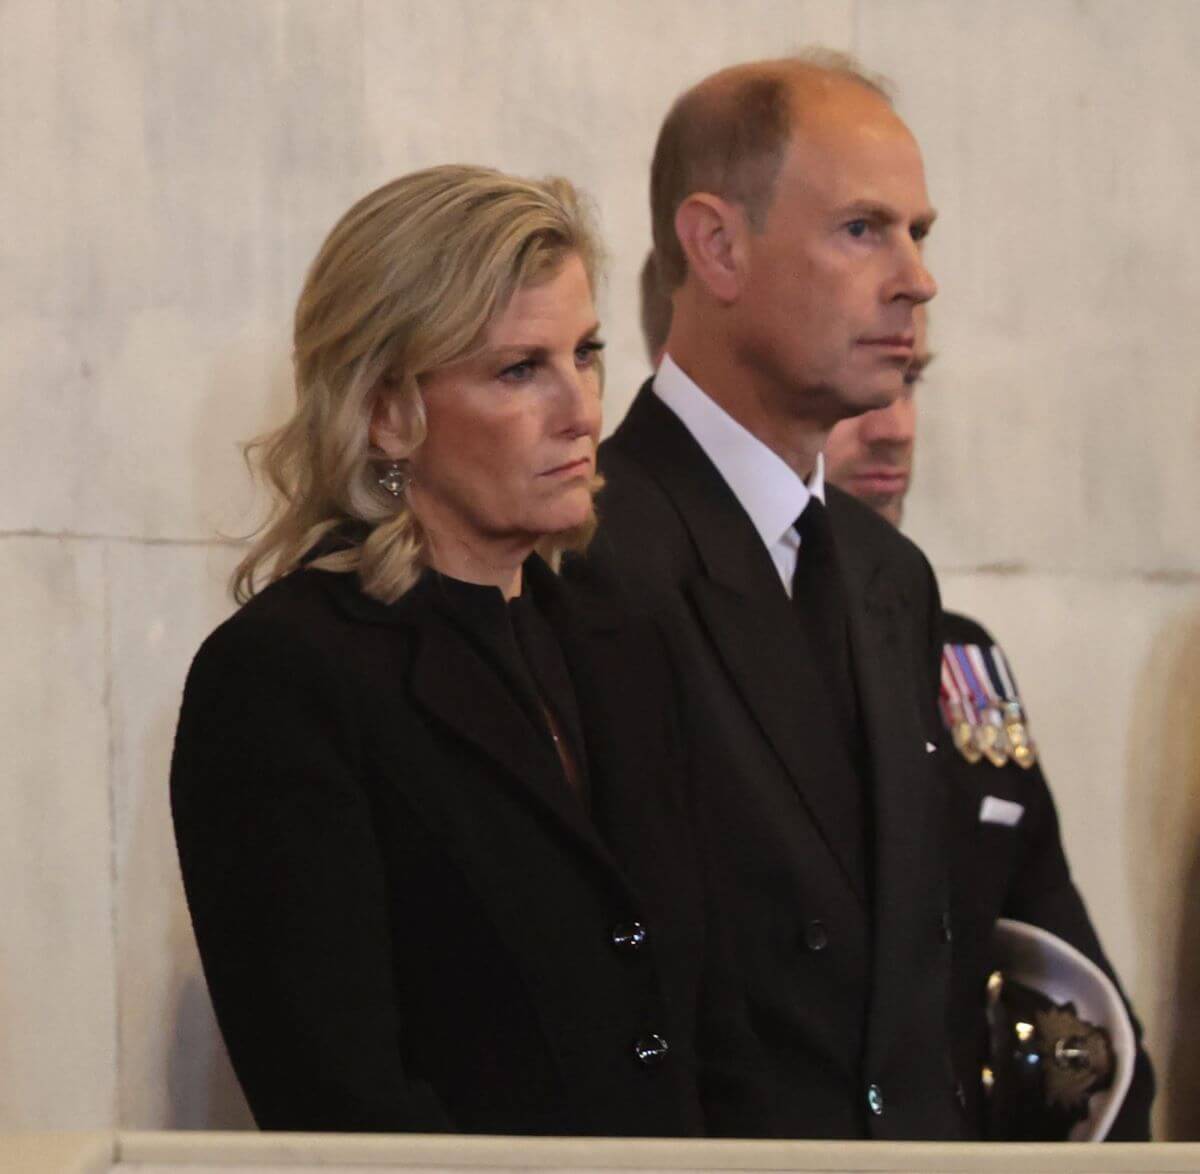 Sophie and Prince Edward watch as the Queen Elizabeth II's grandchildren hold a vigil around the late monarch's coffin